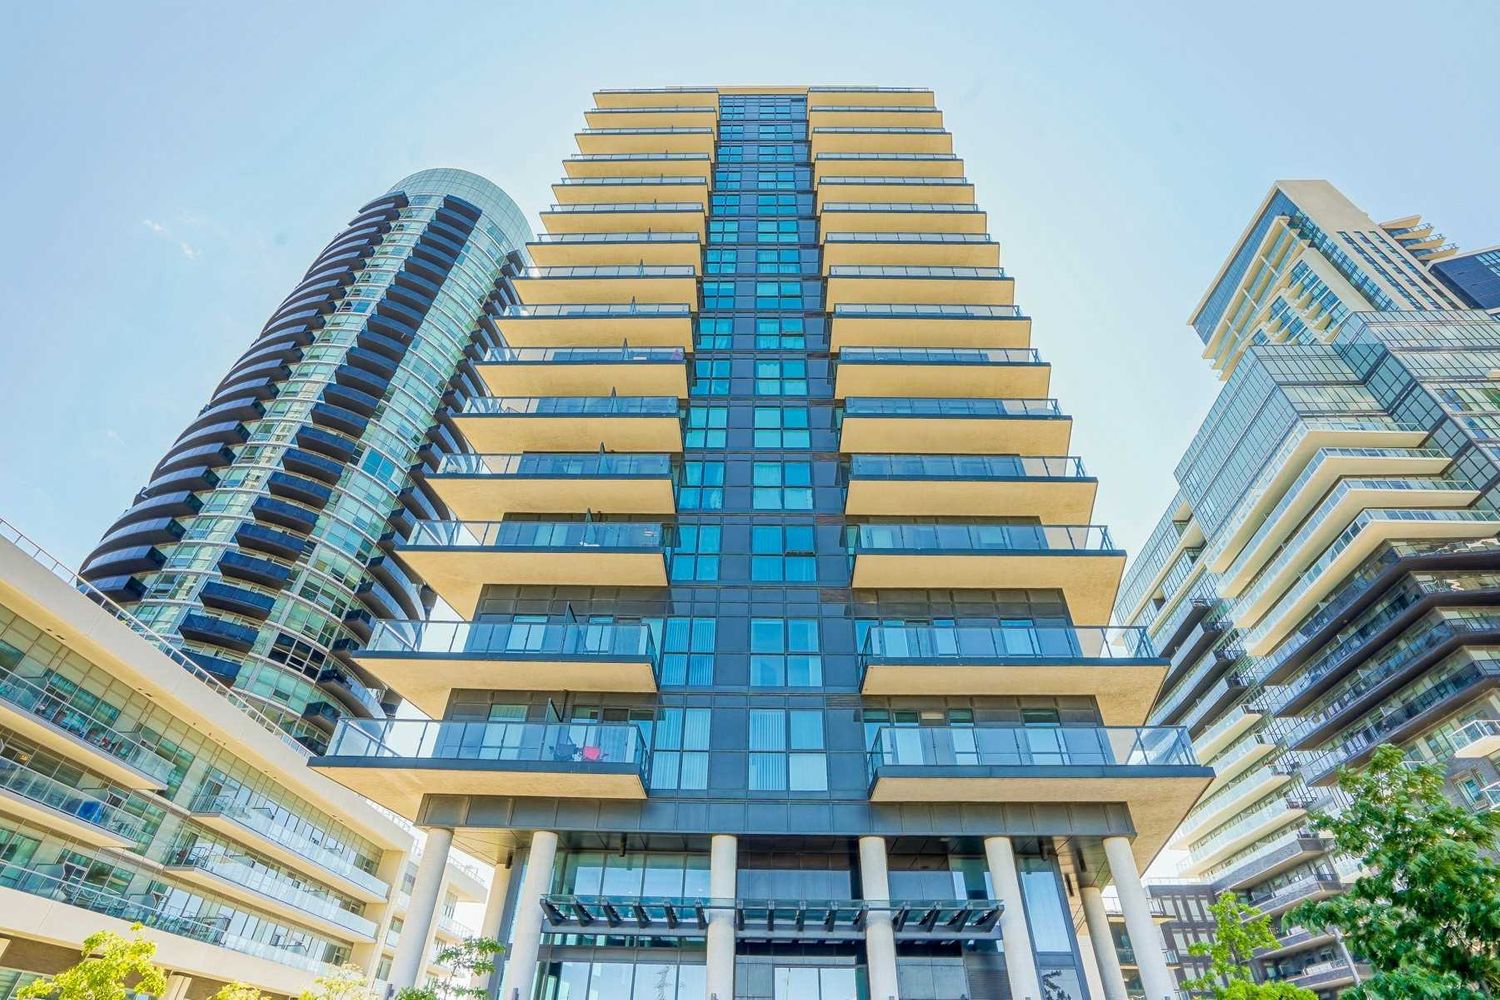 39 Annie Craig Drive. Cove at Waterways Condos  is located in  Etobicoke, Toronto - image #2 of 3